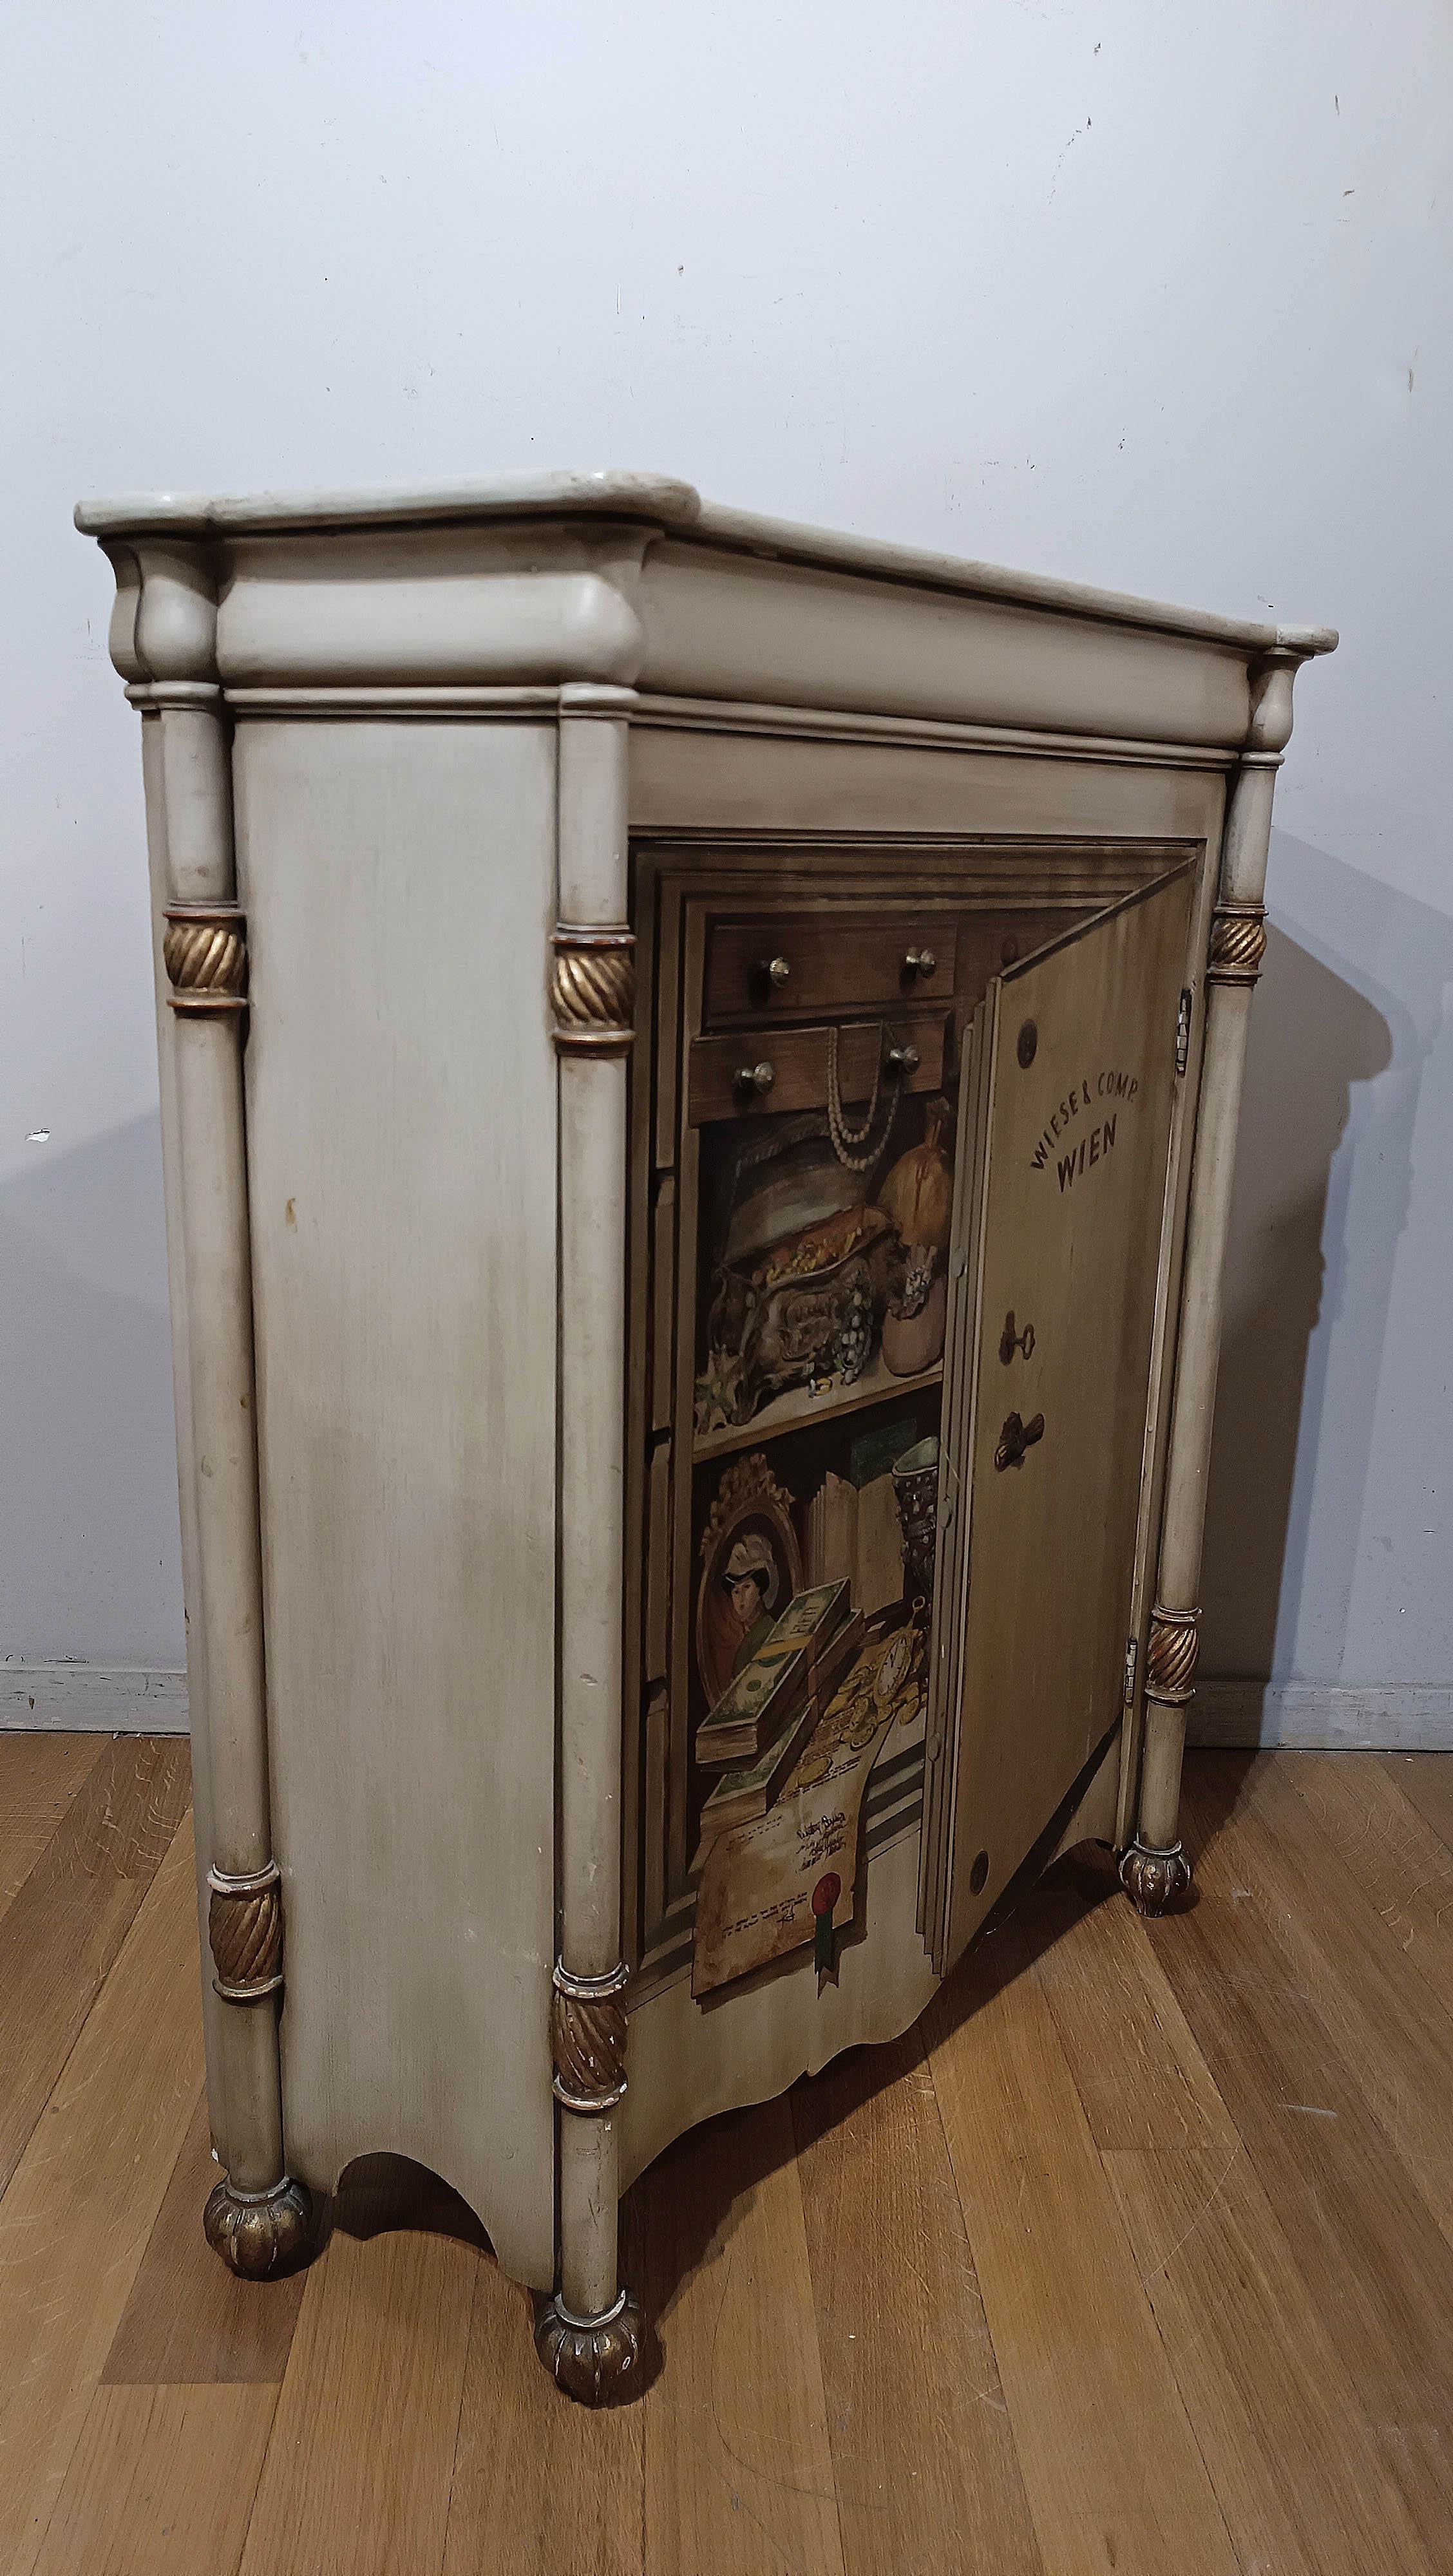 Elegant trompe l'oeil small sideboard, made of painted poplar wood and then gilded with gold leaf. The golden details are found in the capitals of the corner columns, and in the straight knob-shaped feet. But the real peculiarity of this sideboard